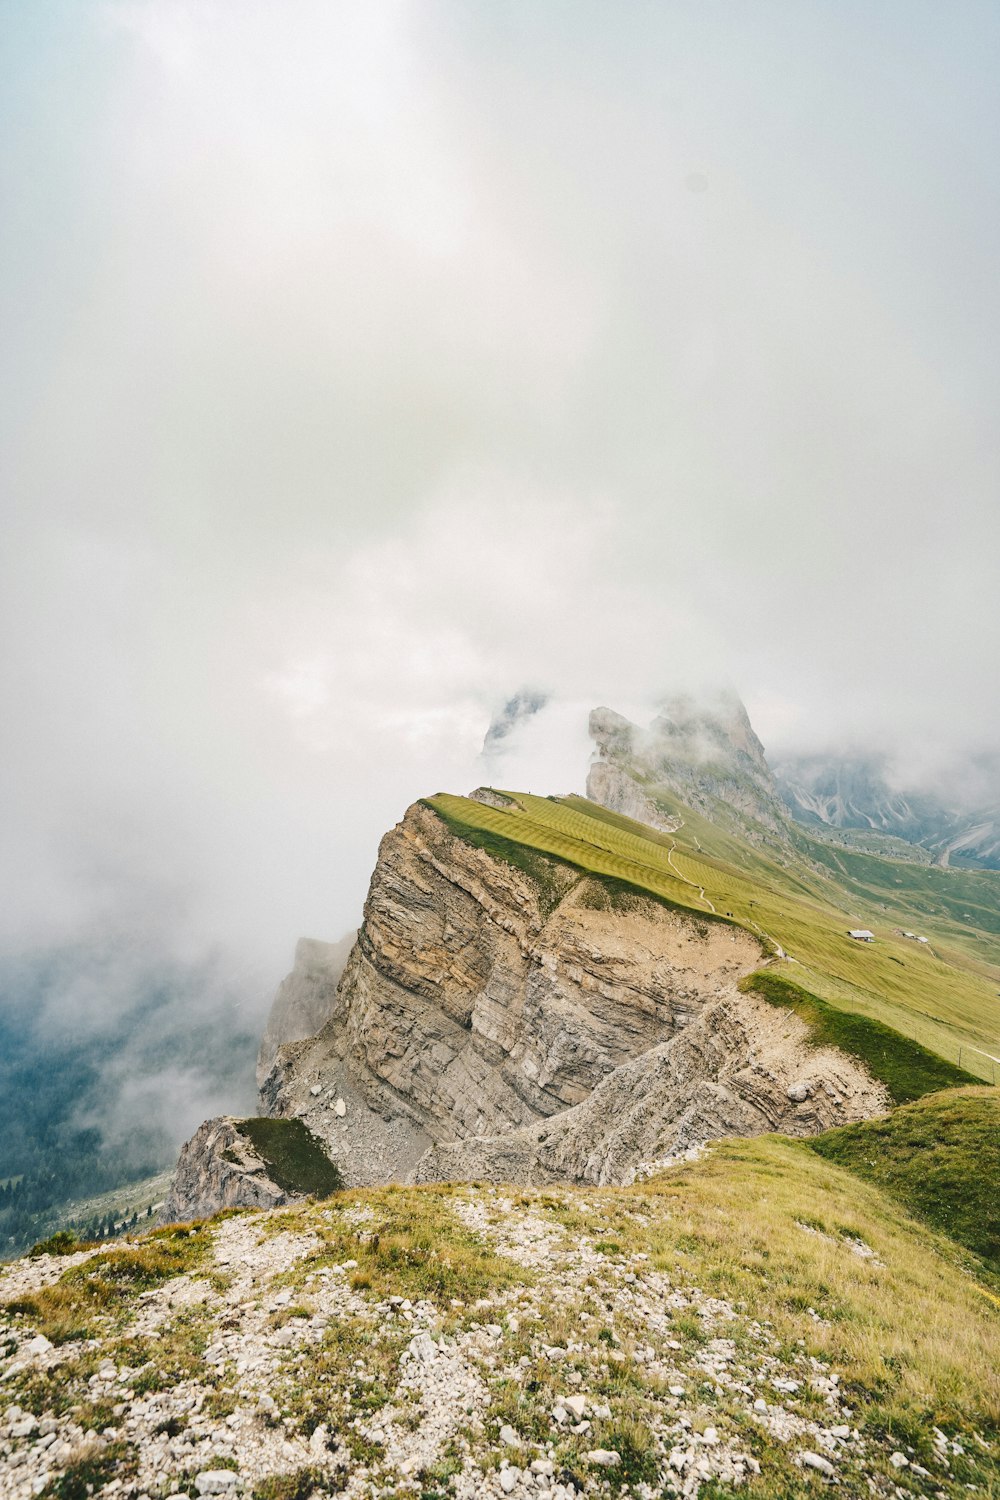 a person standing on top of a mountain on a cloudy day